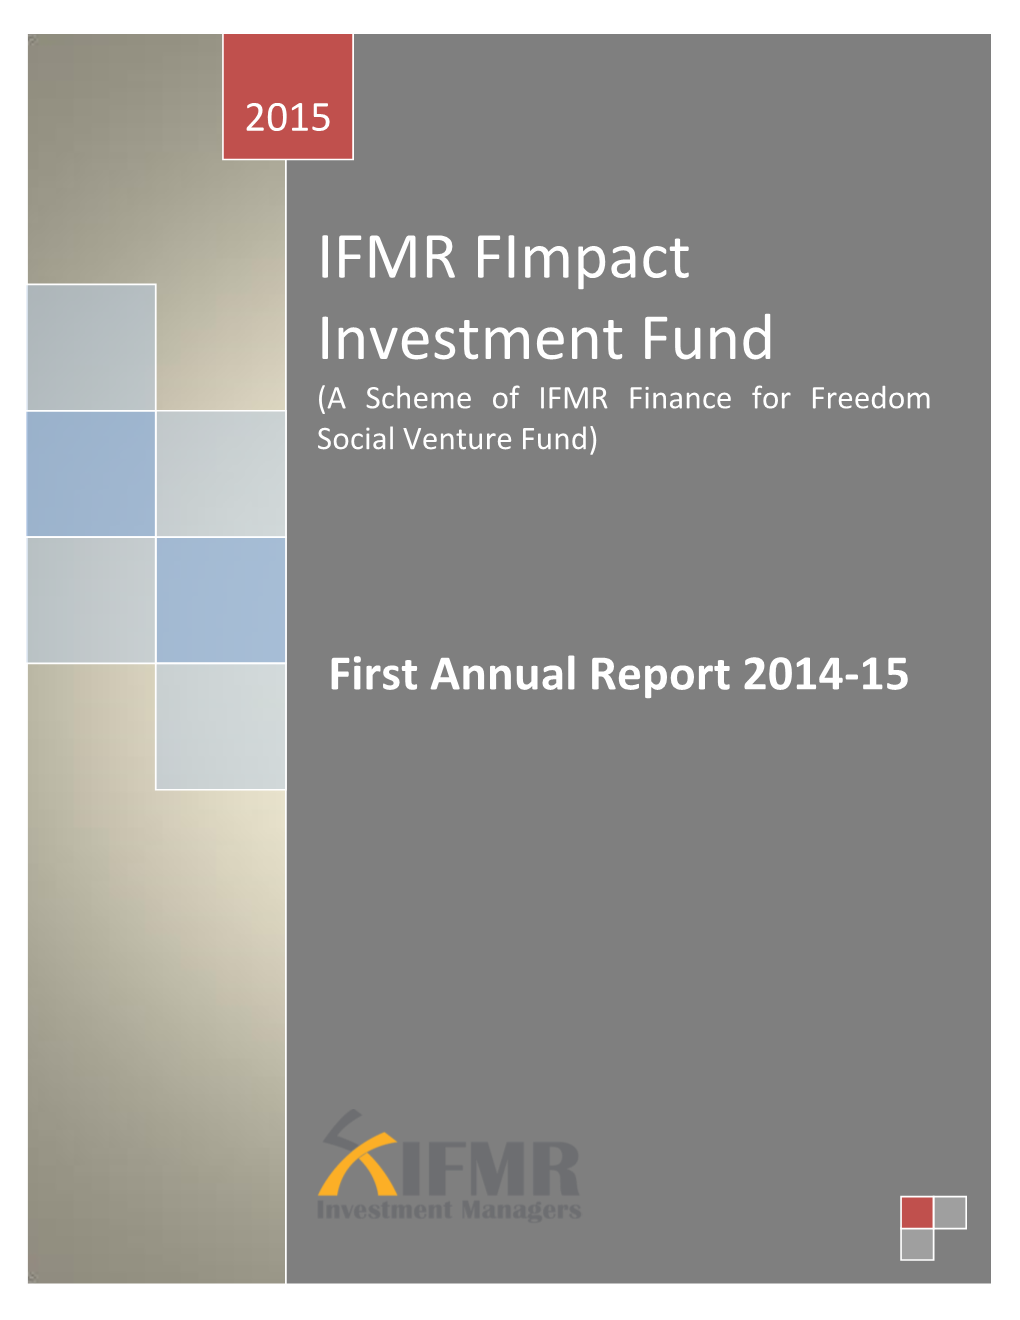 IFMR Fimpact Investment Fund (A Scheme of IFMR Finance for Freedom Social Venture Fund)